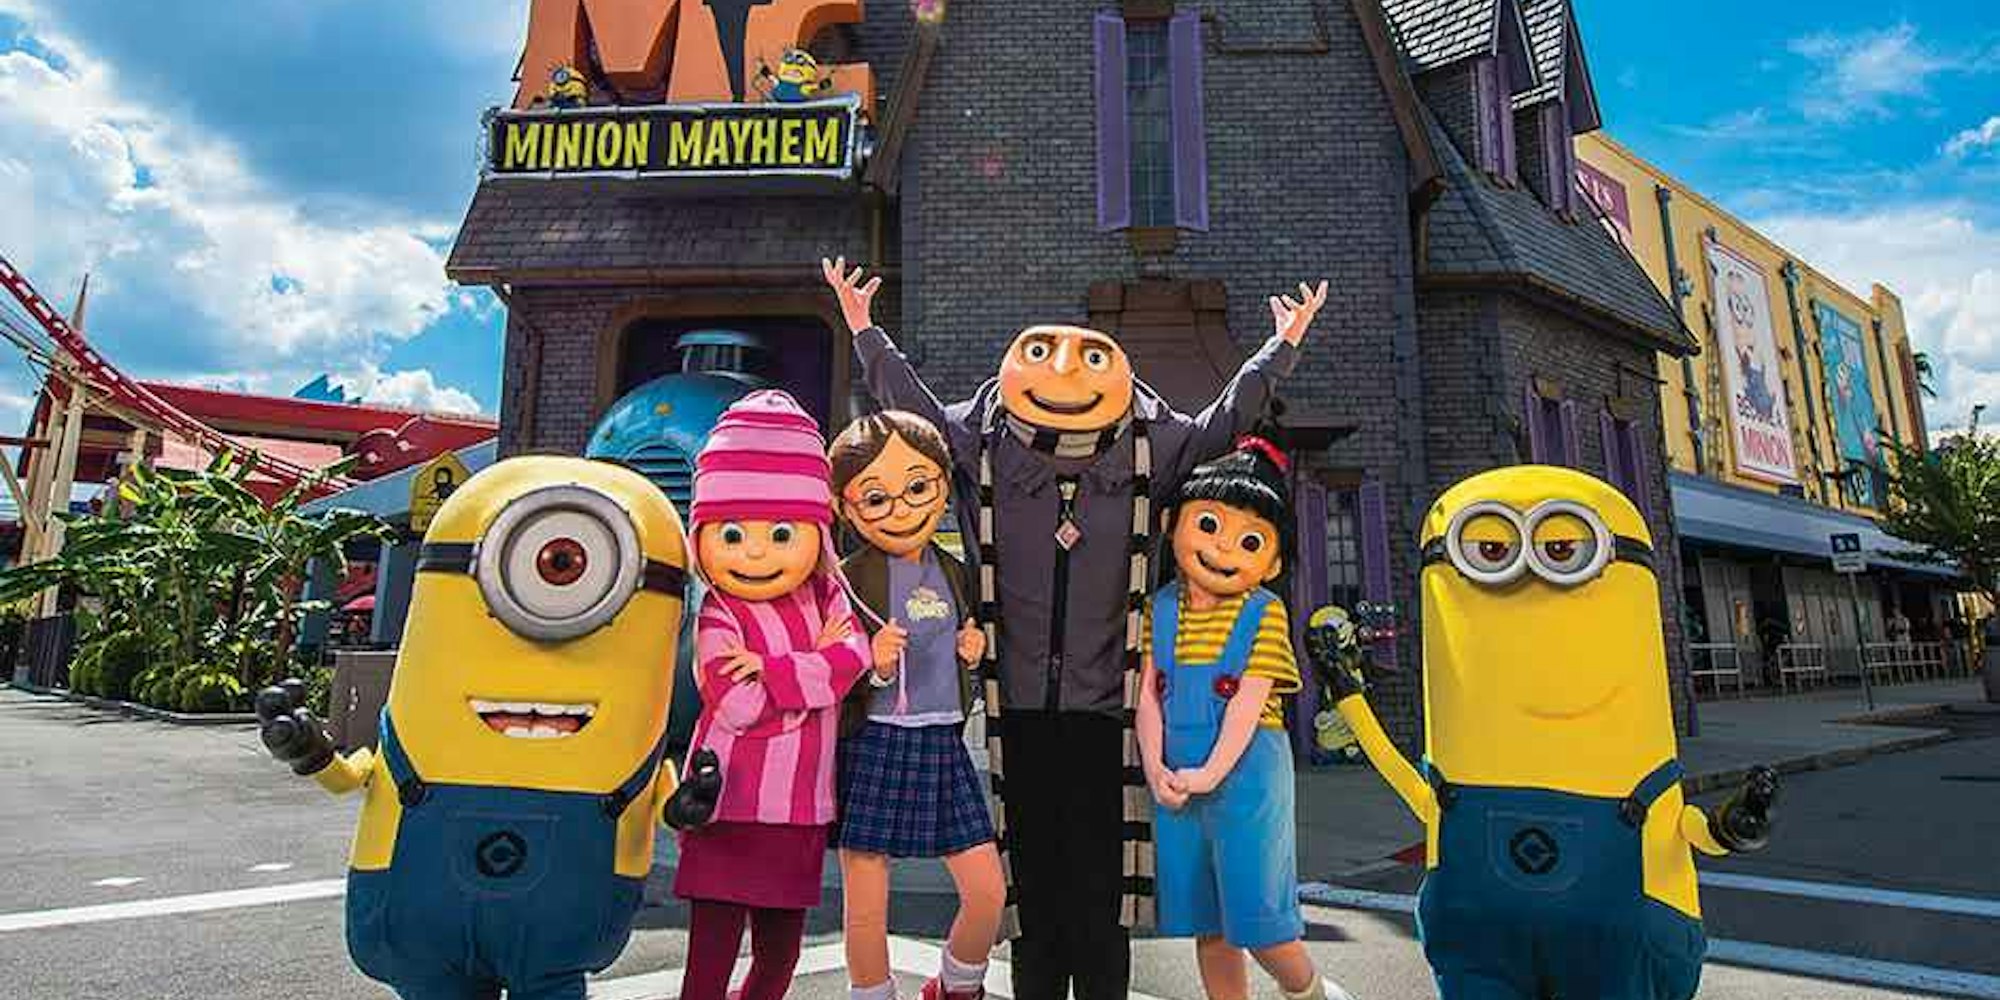 Cover Image for The Best Attractions for Kids at Universal Orlando